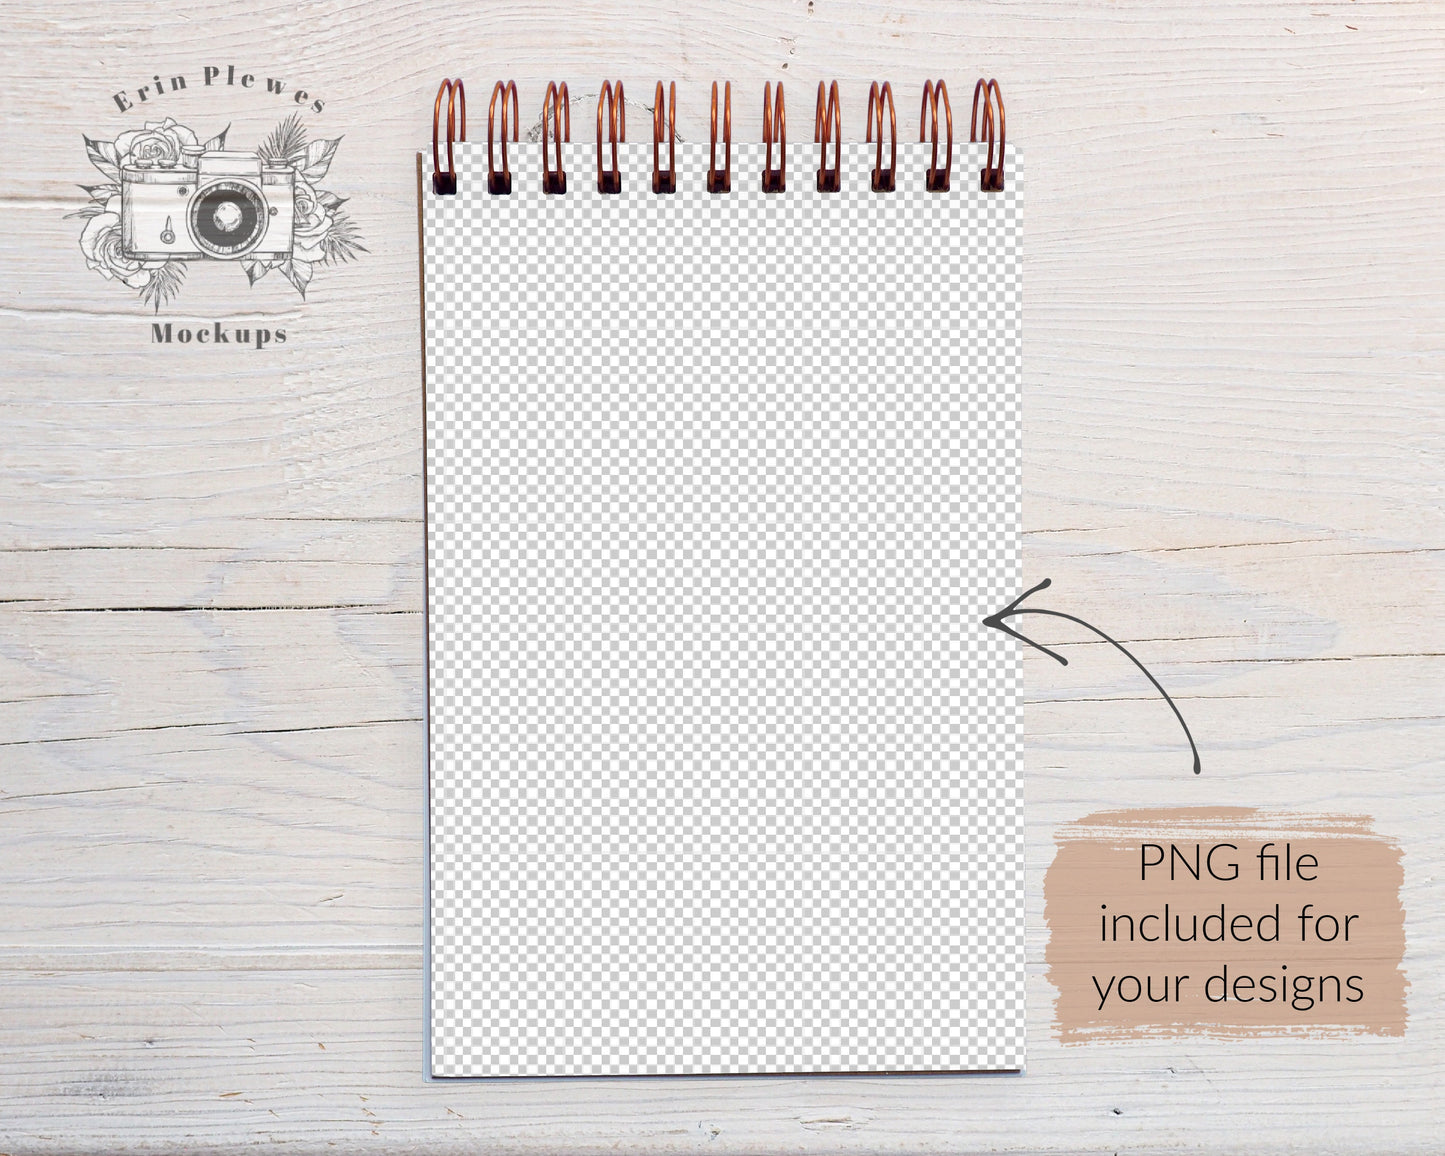 Spiral Top Notebook Mockup, Notebook Mock-Up on Rustic Wood, PSD Smart Object Notepad Flat Lay, Instant Digital Download Jpeg PNG